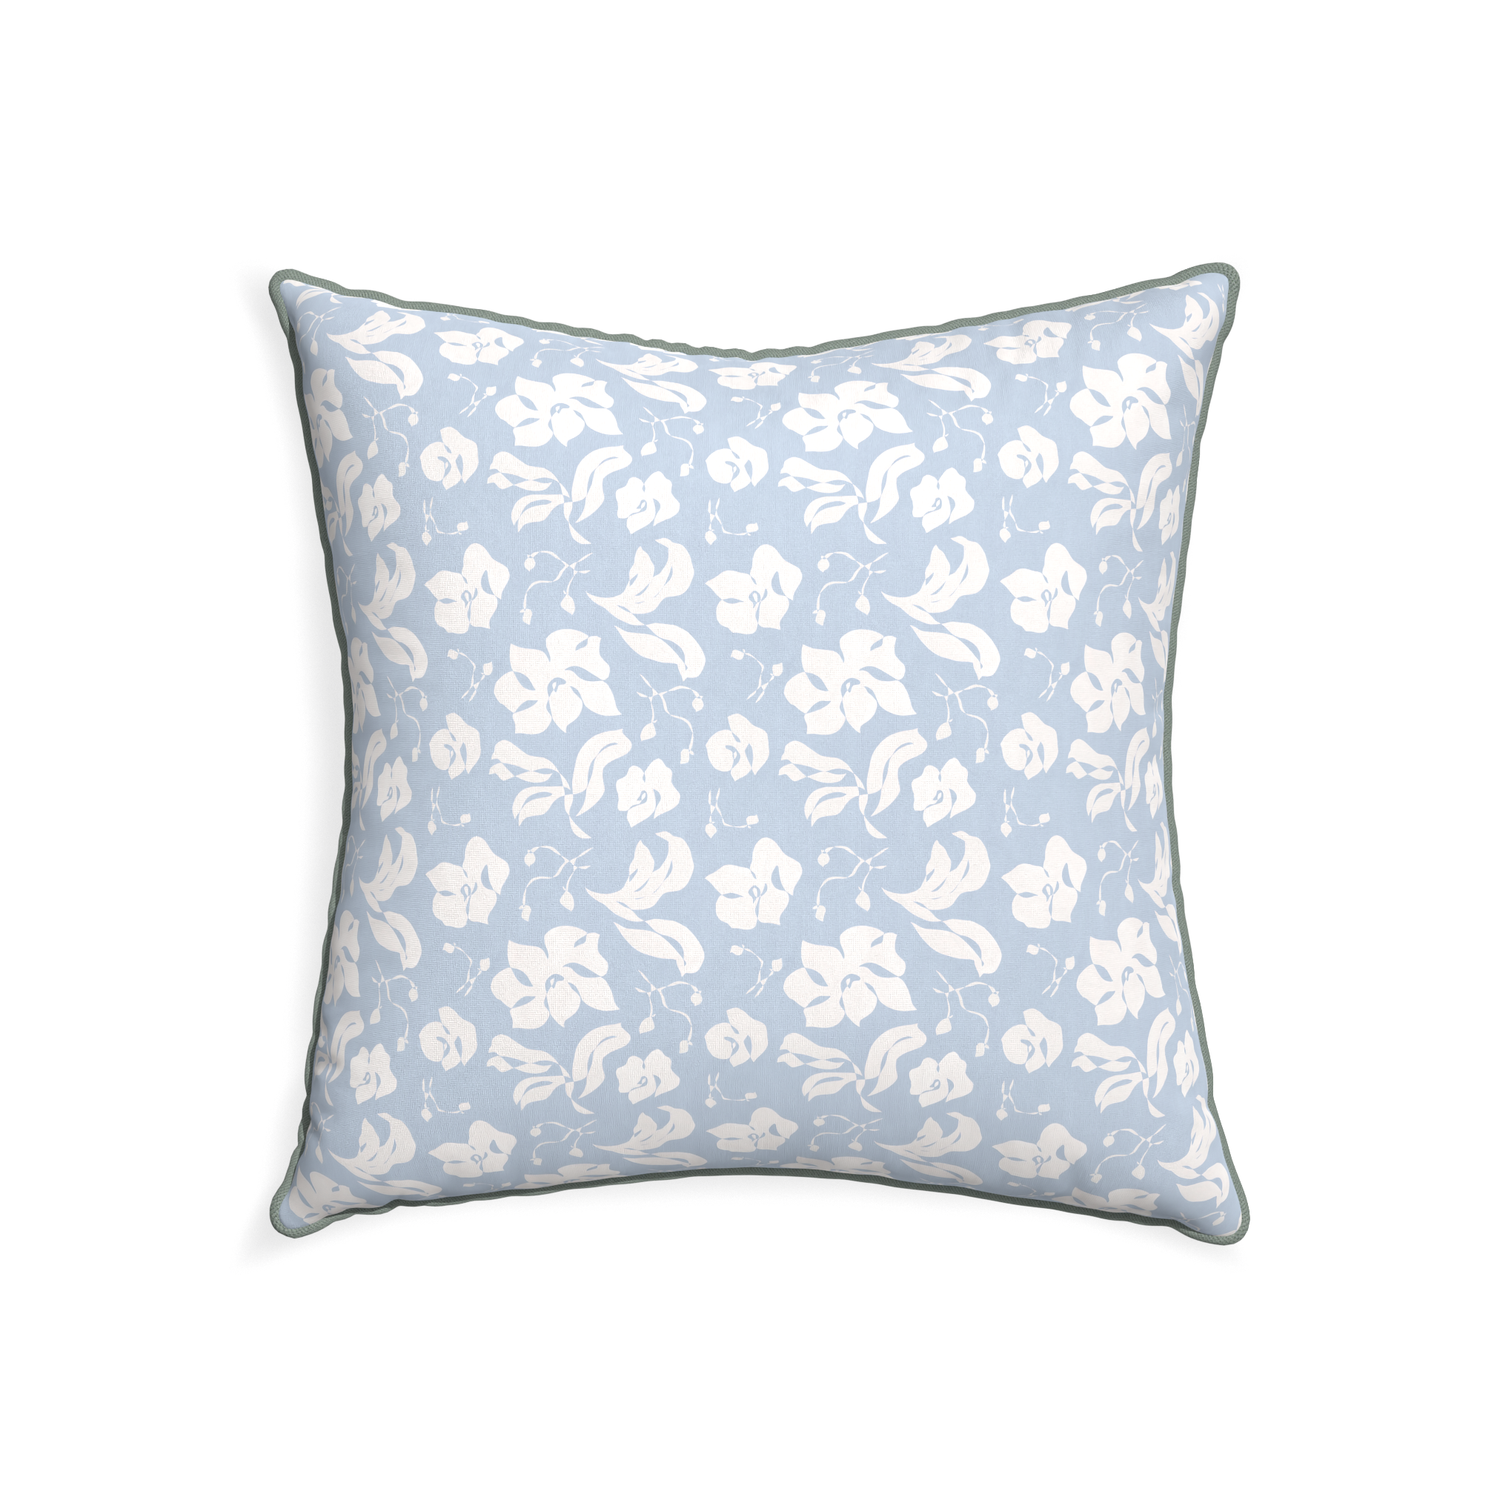 22-square georgia custom cornflower blue floralpillow with sage piping on white background